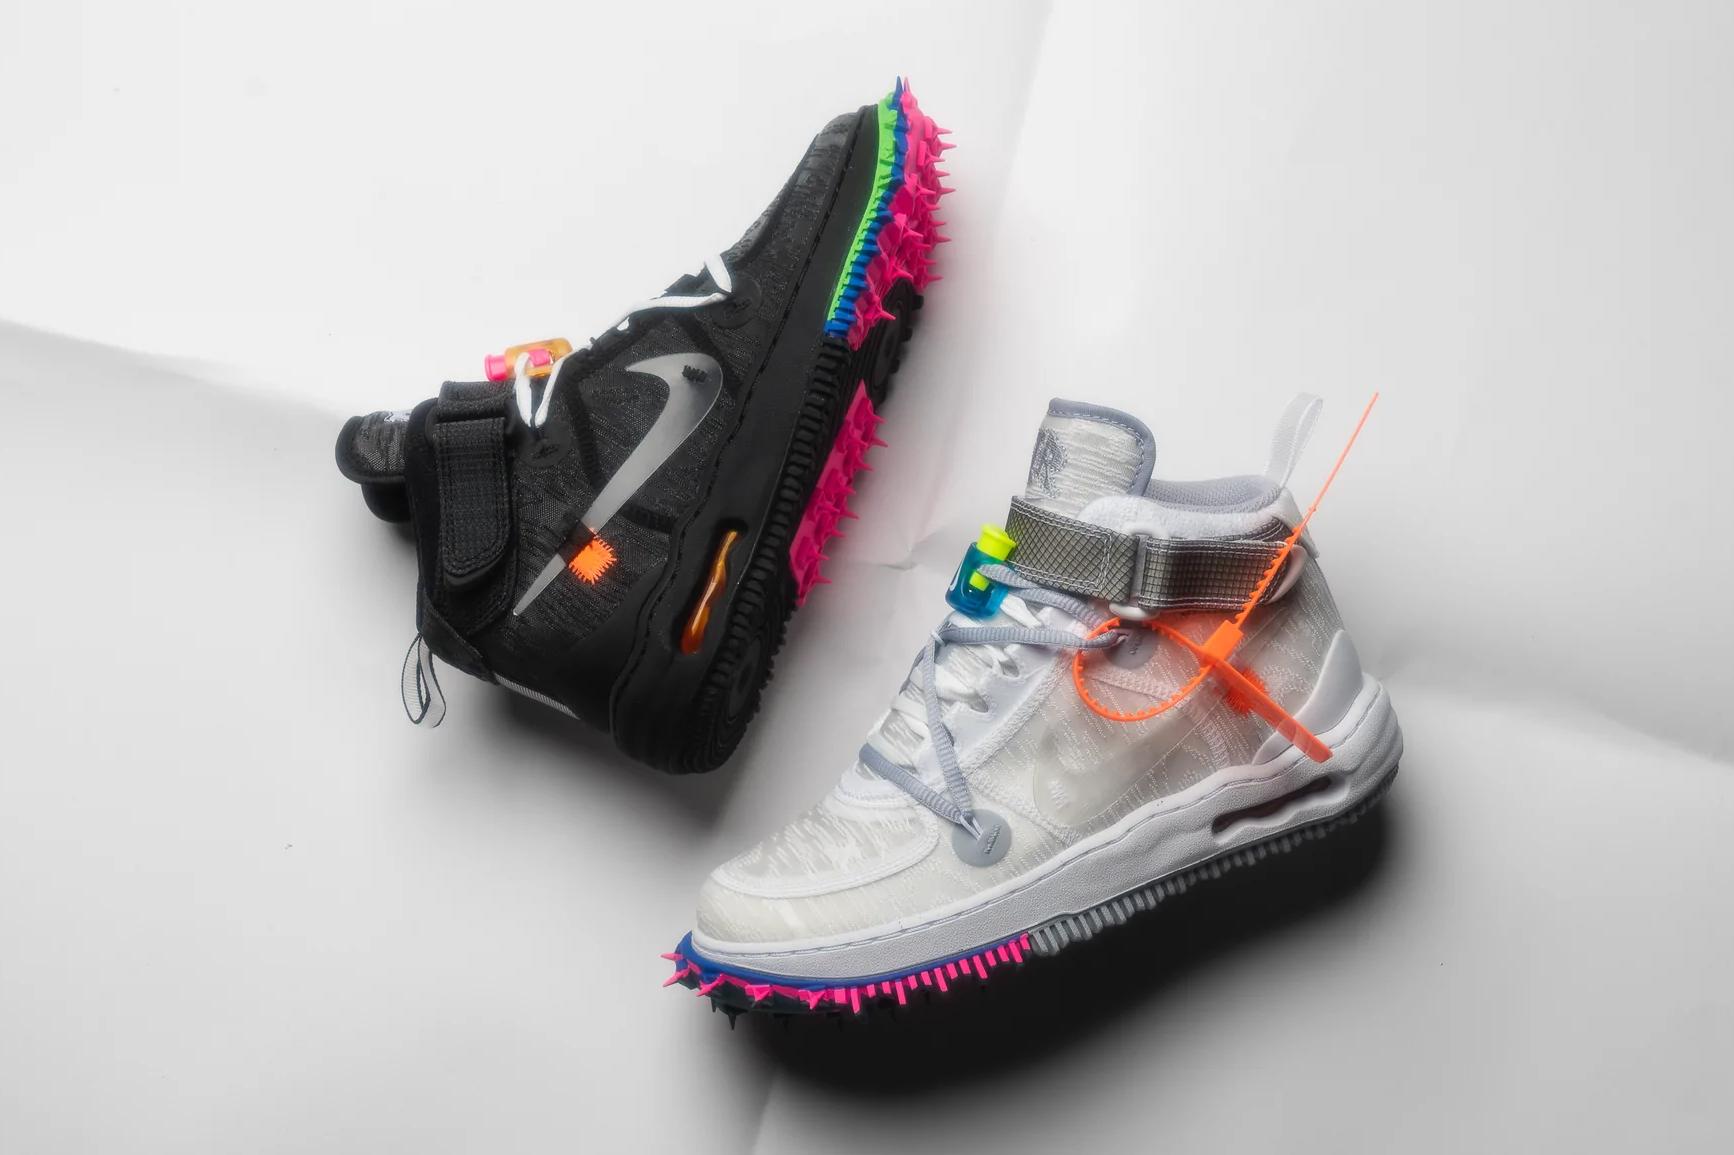 Where to Buy the Off-White x Nike nike air max 98 cosmic clay 640744 014 release date Mid